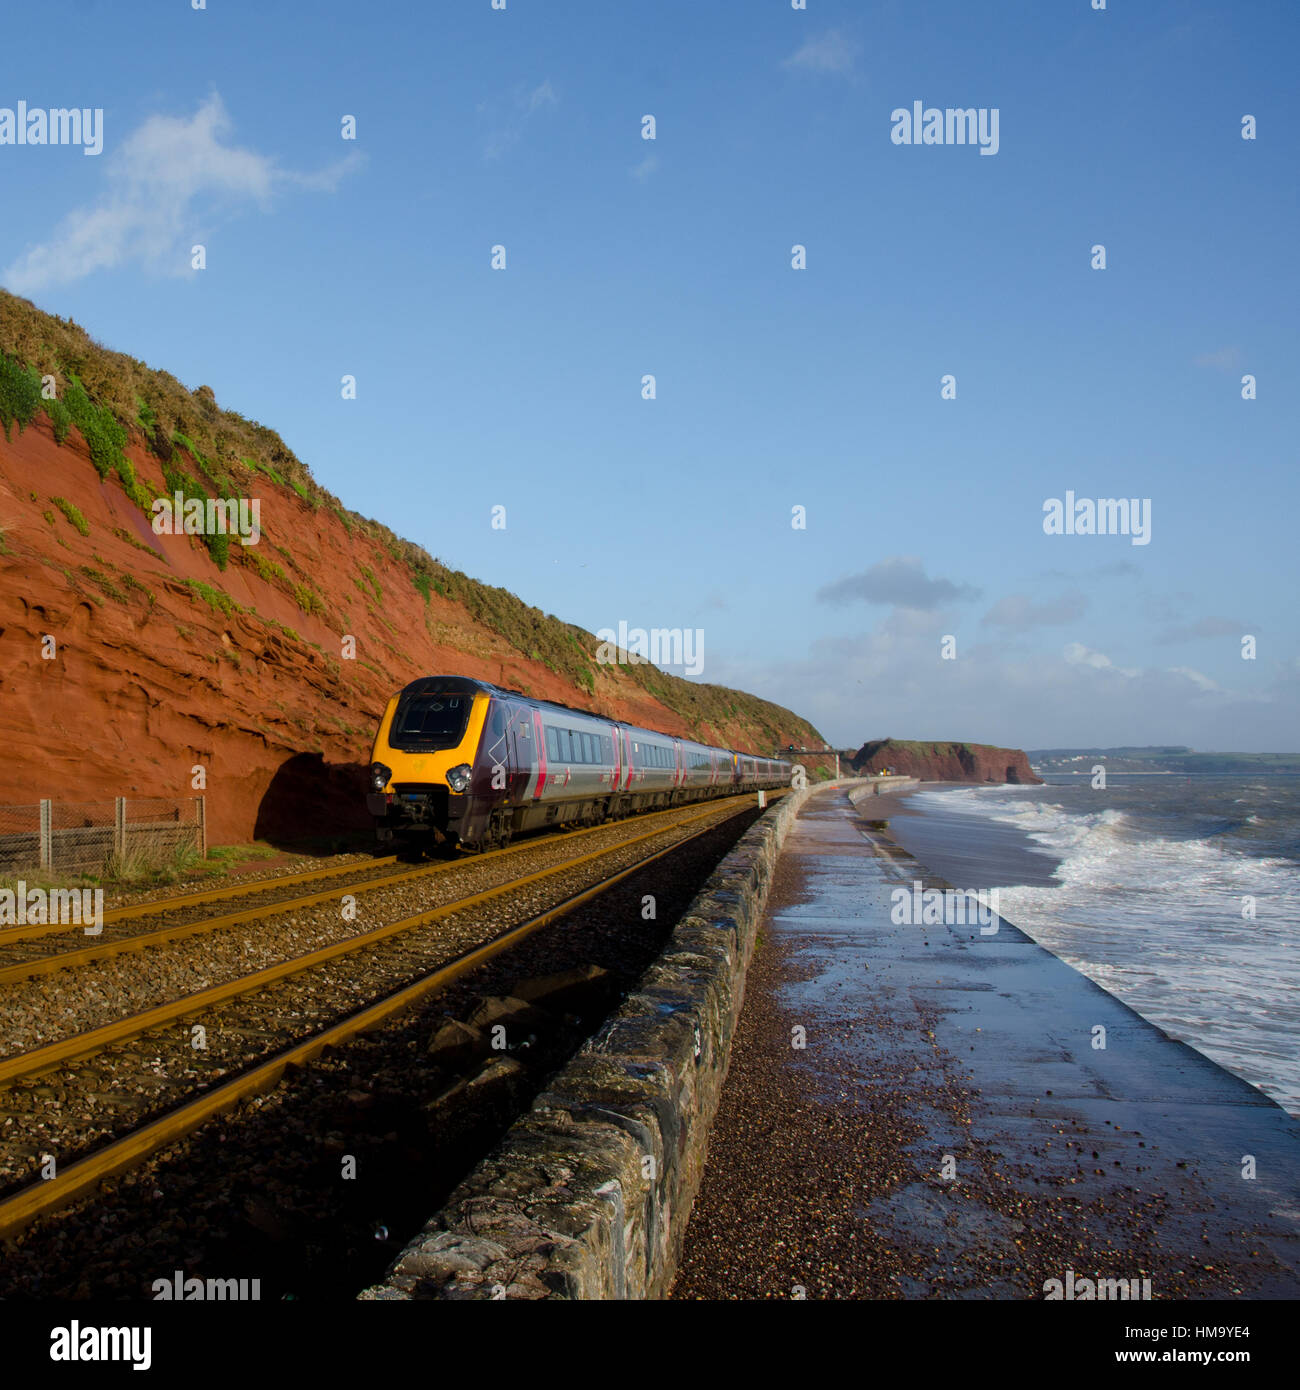 An Arriva Cross Country Class 220 Voyager High Speed Train between Dawlish and Dawlish Warren.  In the bacjground is Langstone Rock. Stock Photo